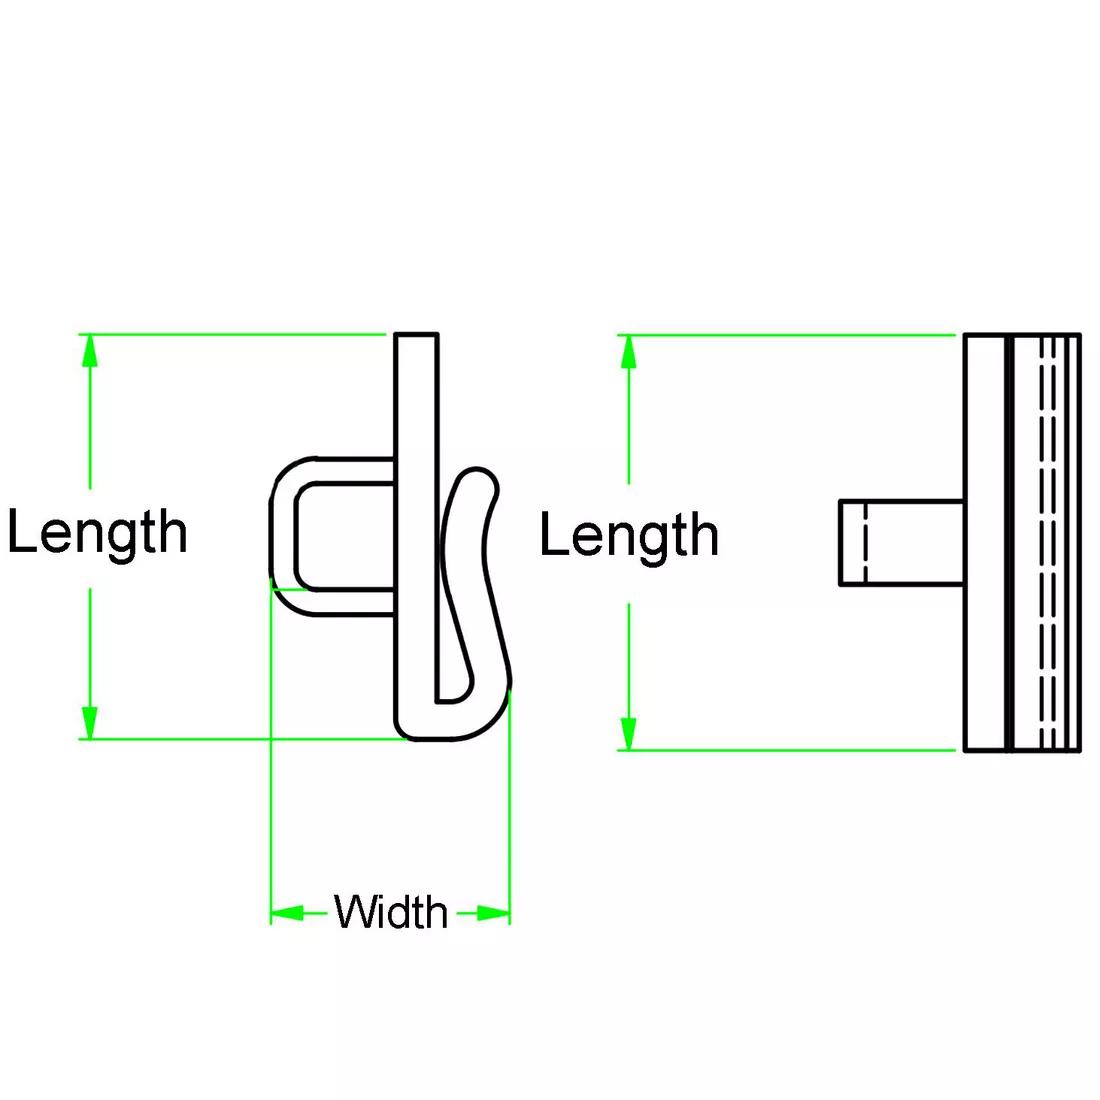 Self-Adhesive Ceiling Clips - Line Drawing